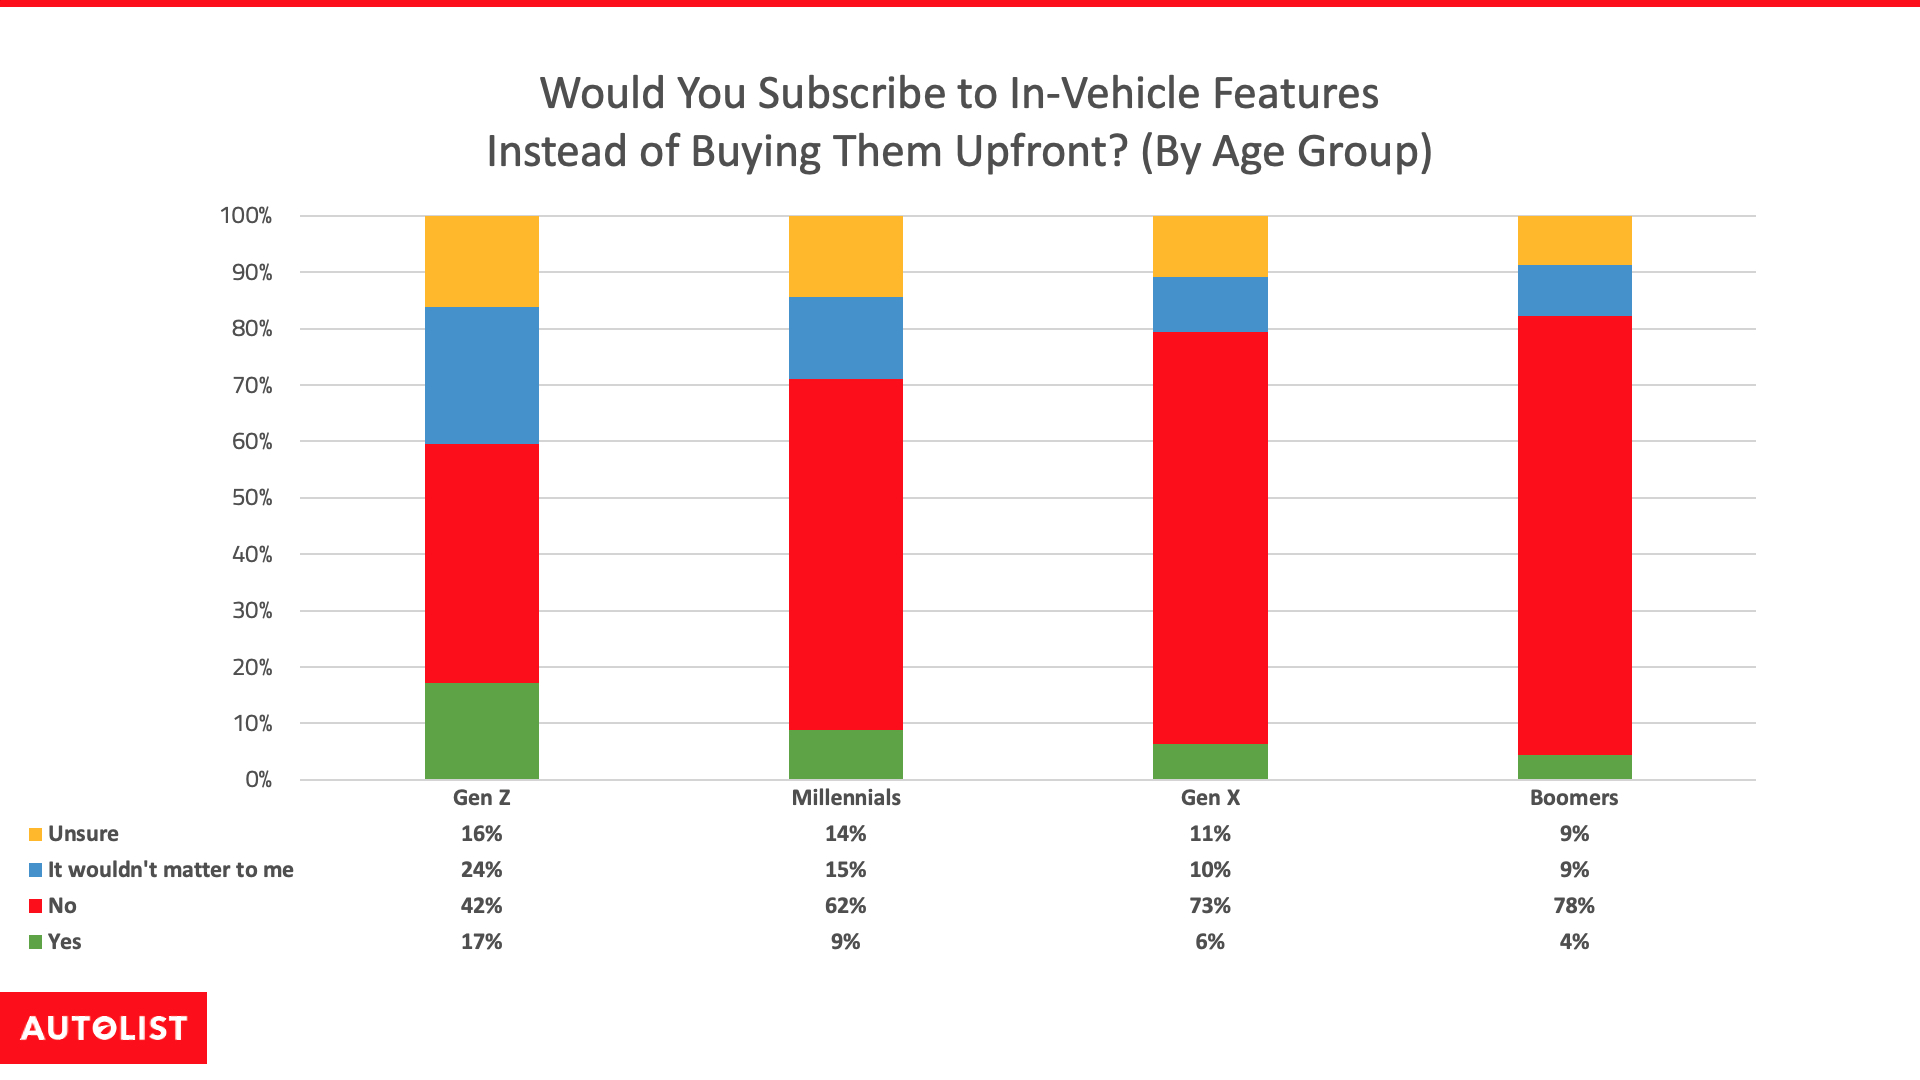 Subscription intention by age group